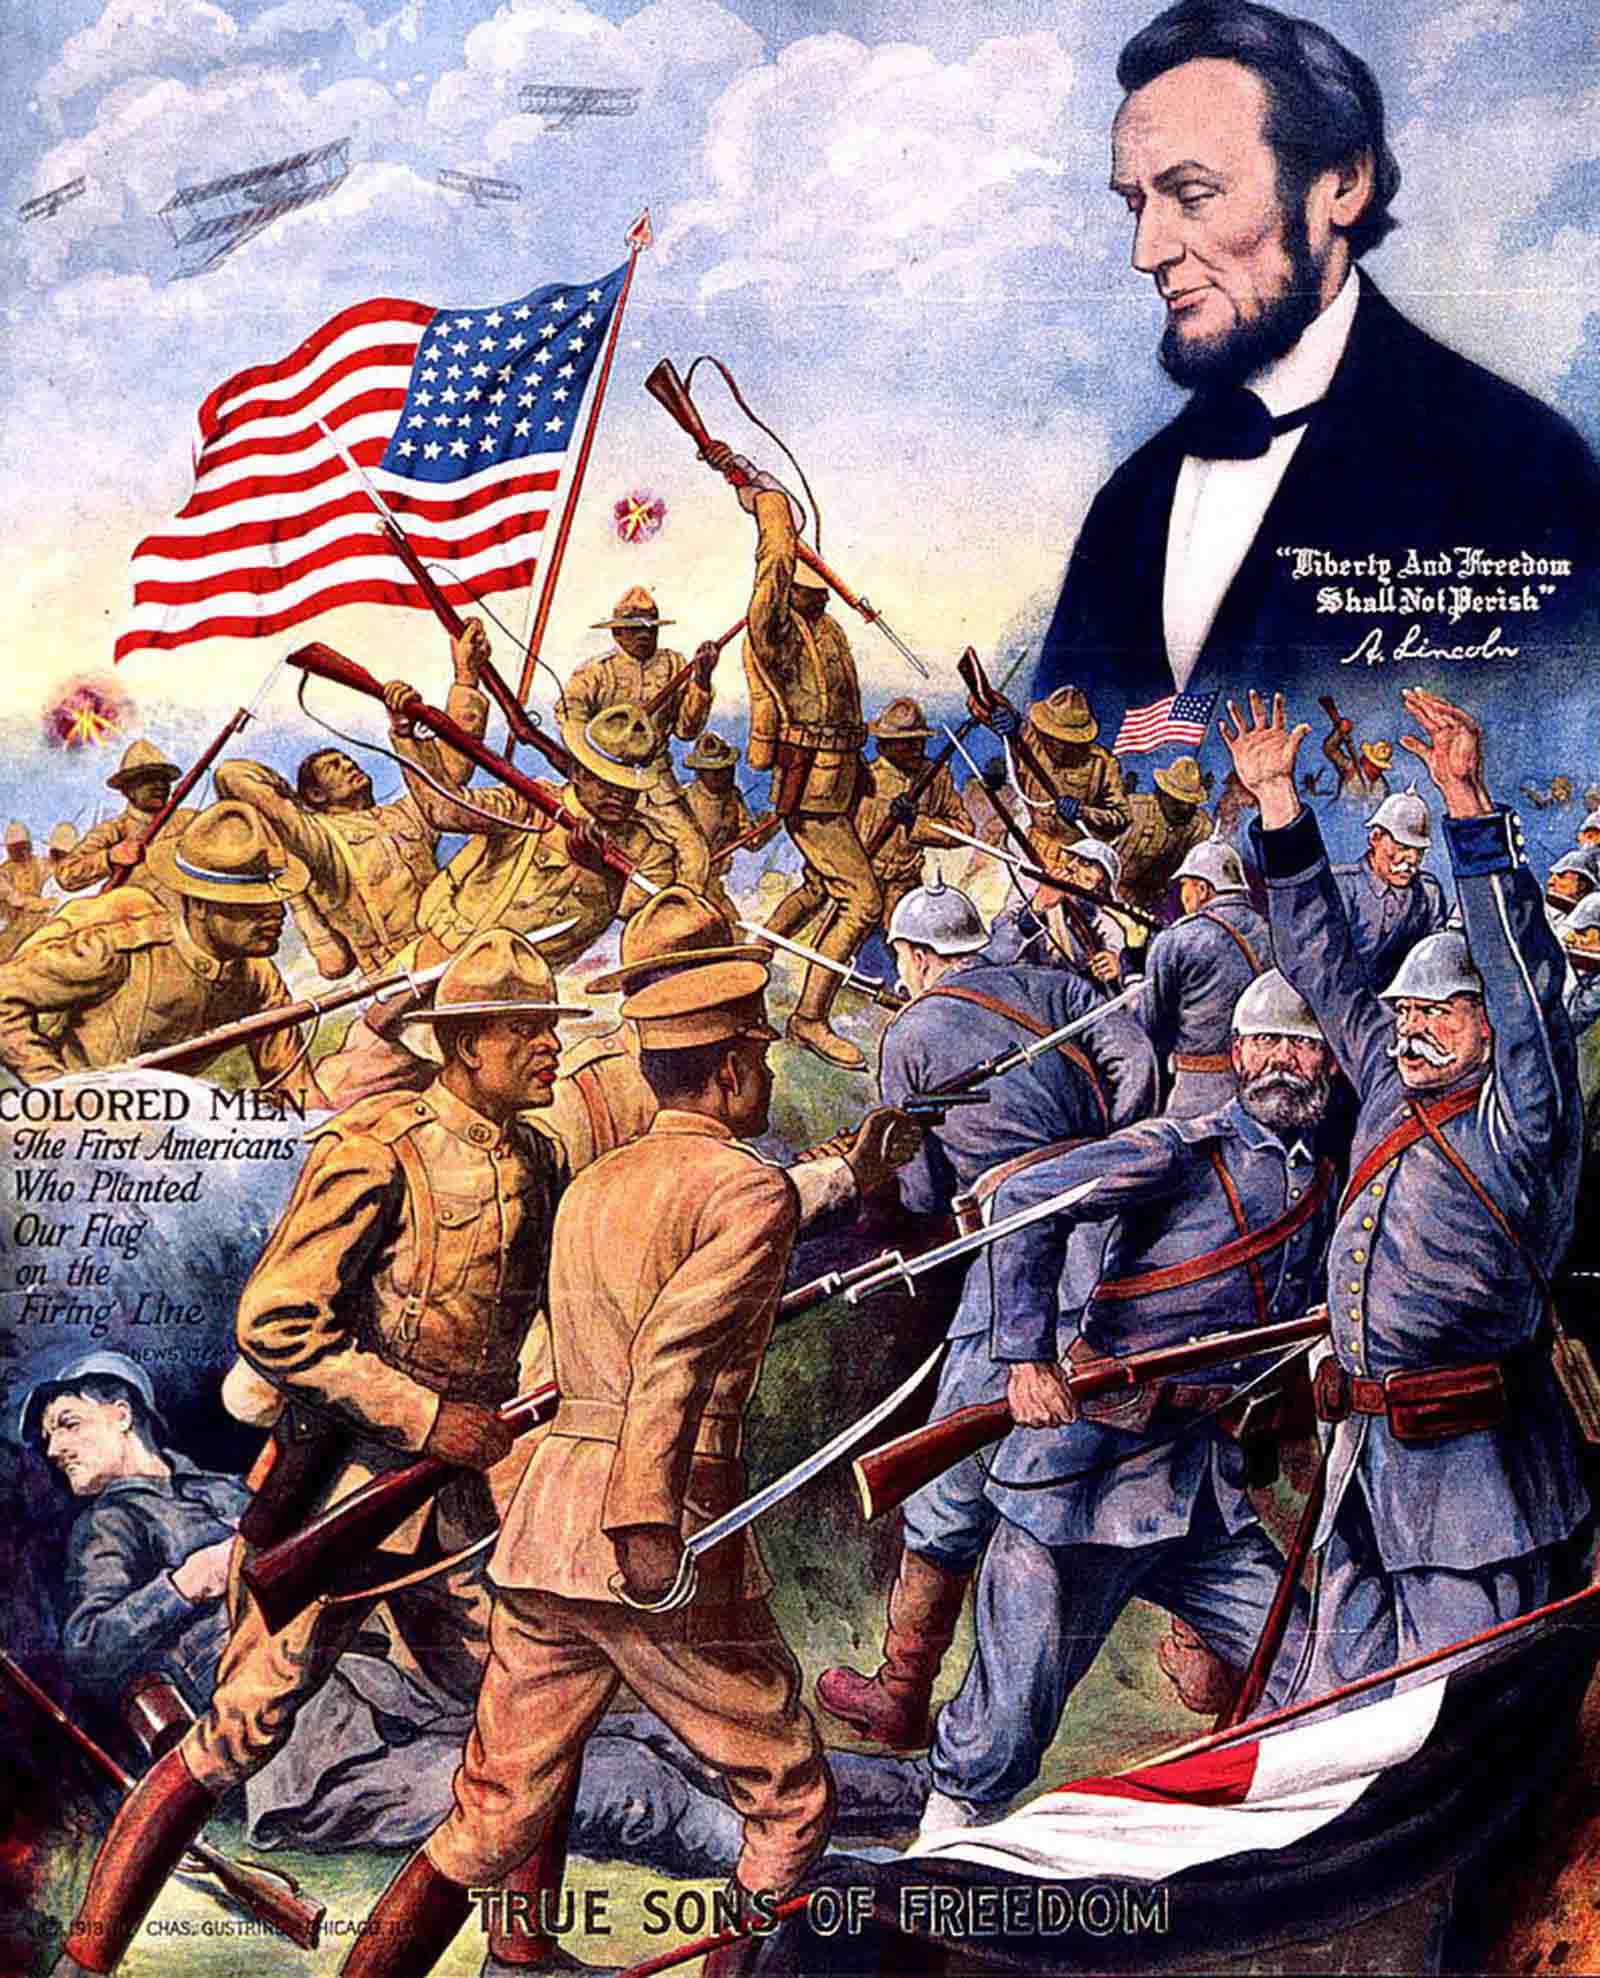 Wartime poster of the 369th fighting German soldiers, with the figure of Abraham Lincoln above.